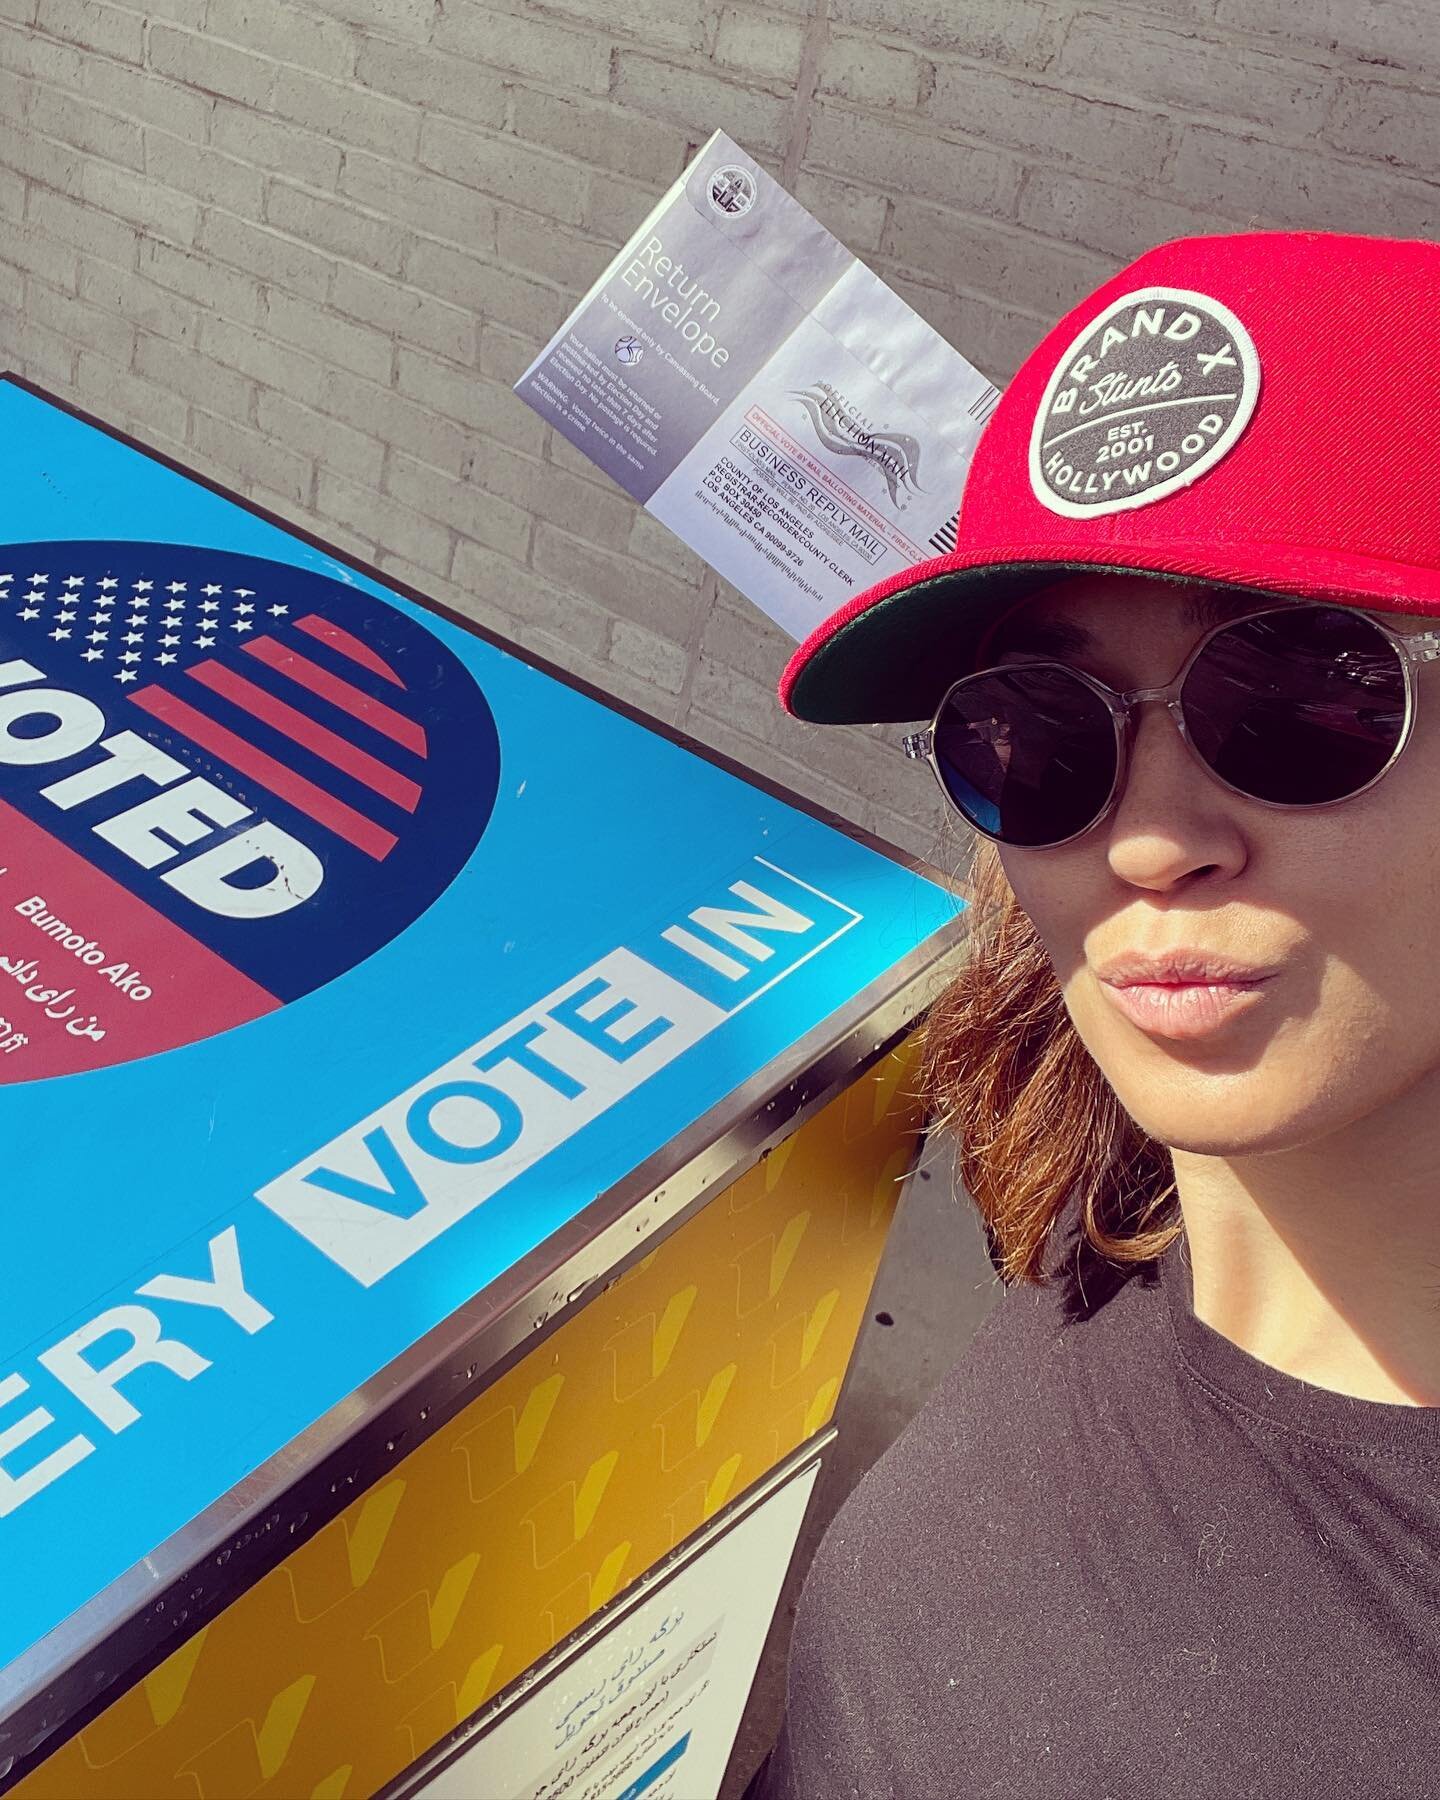 Exercise your right to vote! 💪🏽🇺🇸 #vote